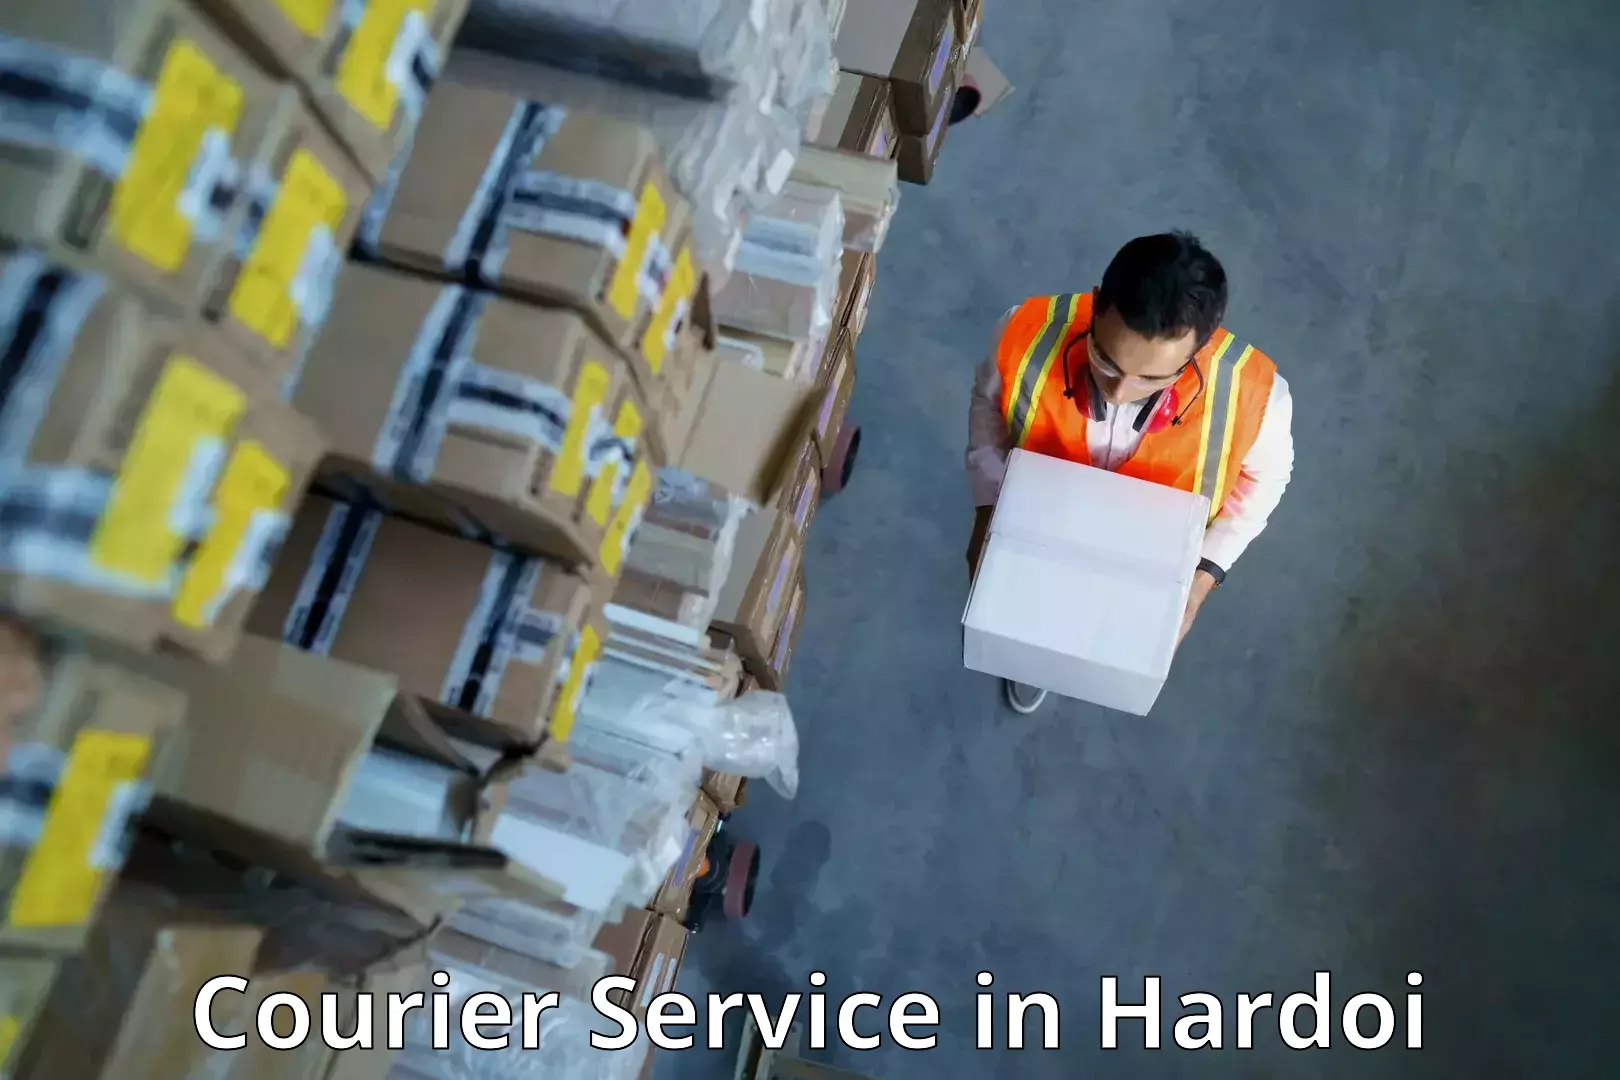 Customer-friendly courier services in Hardoi